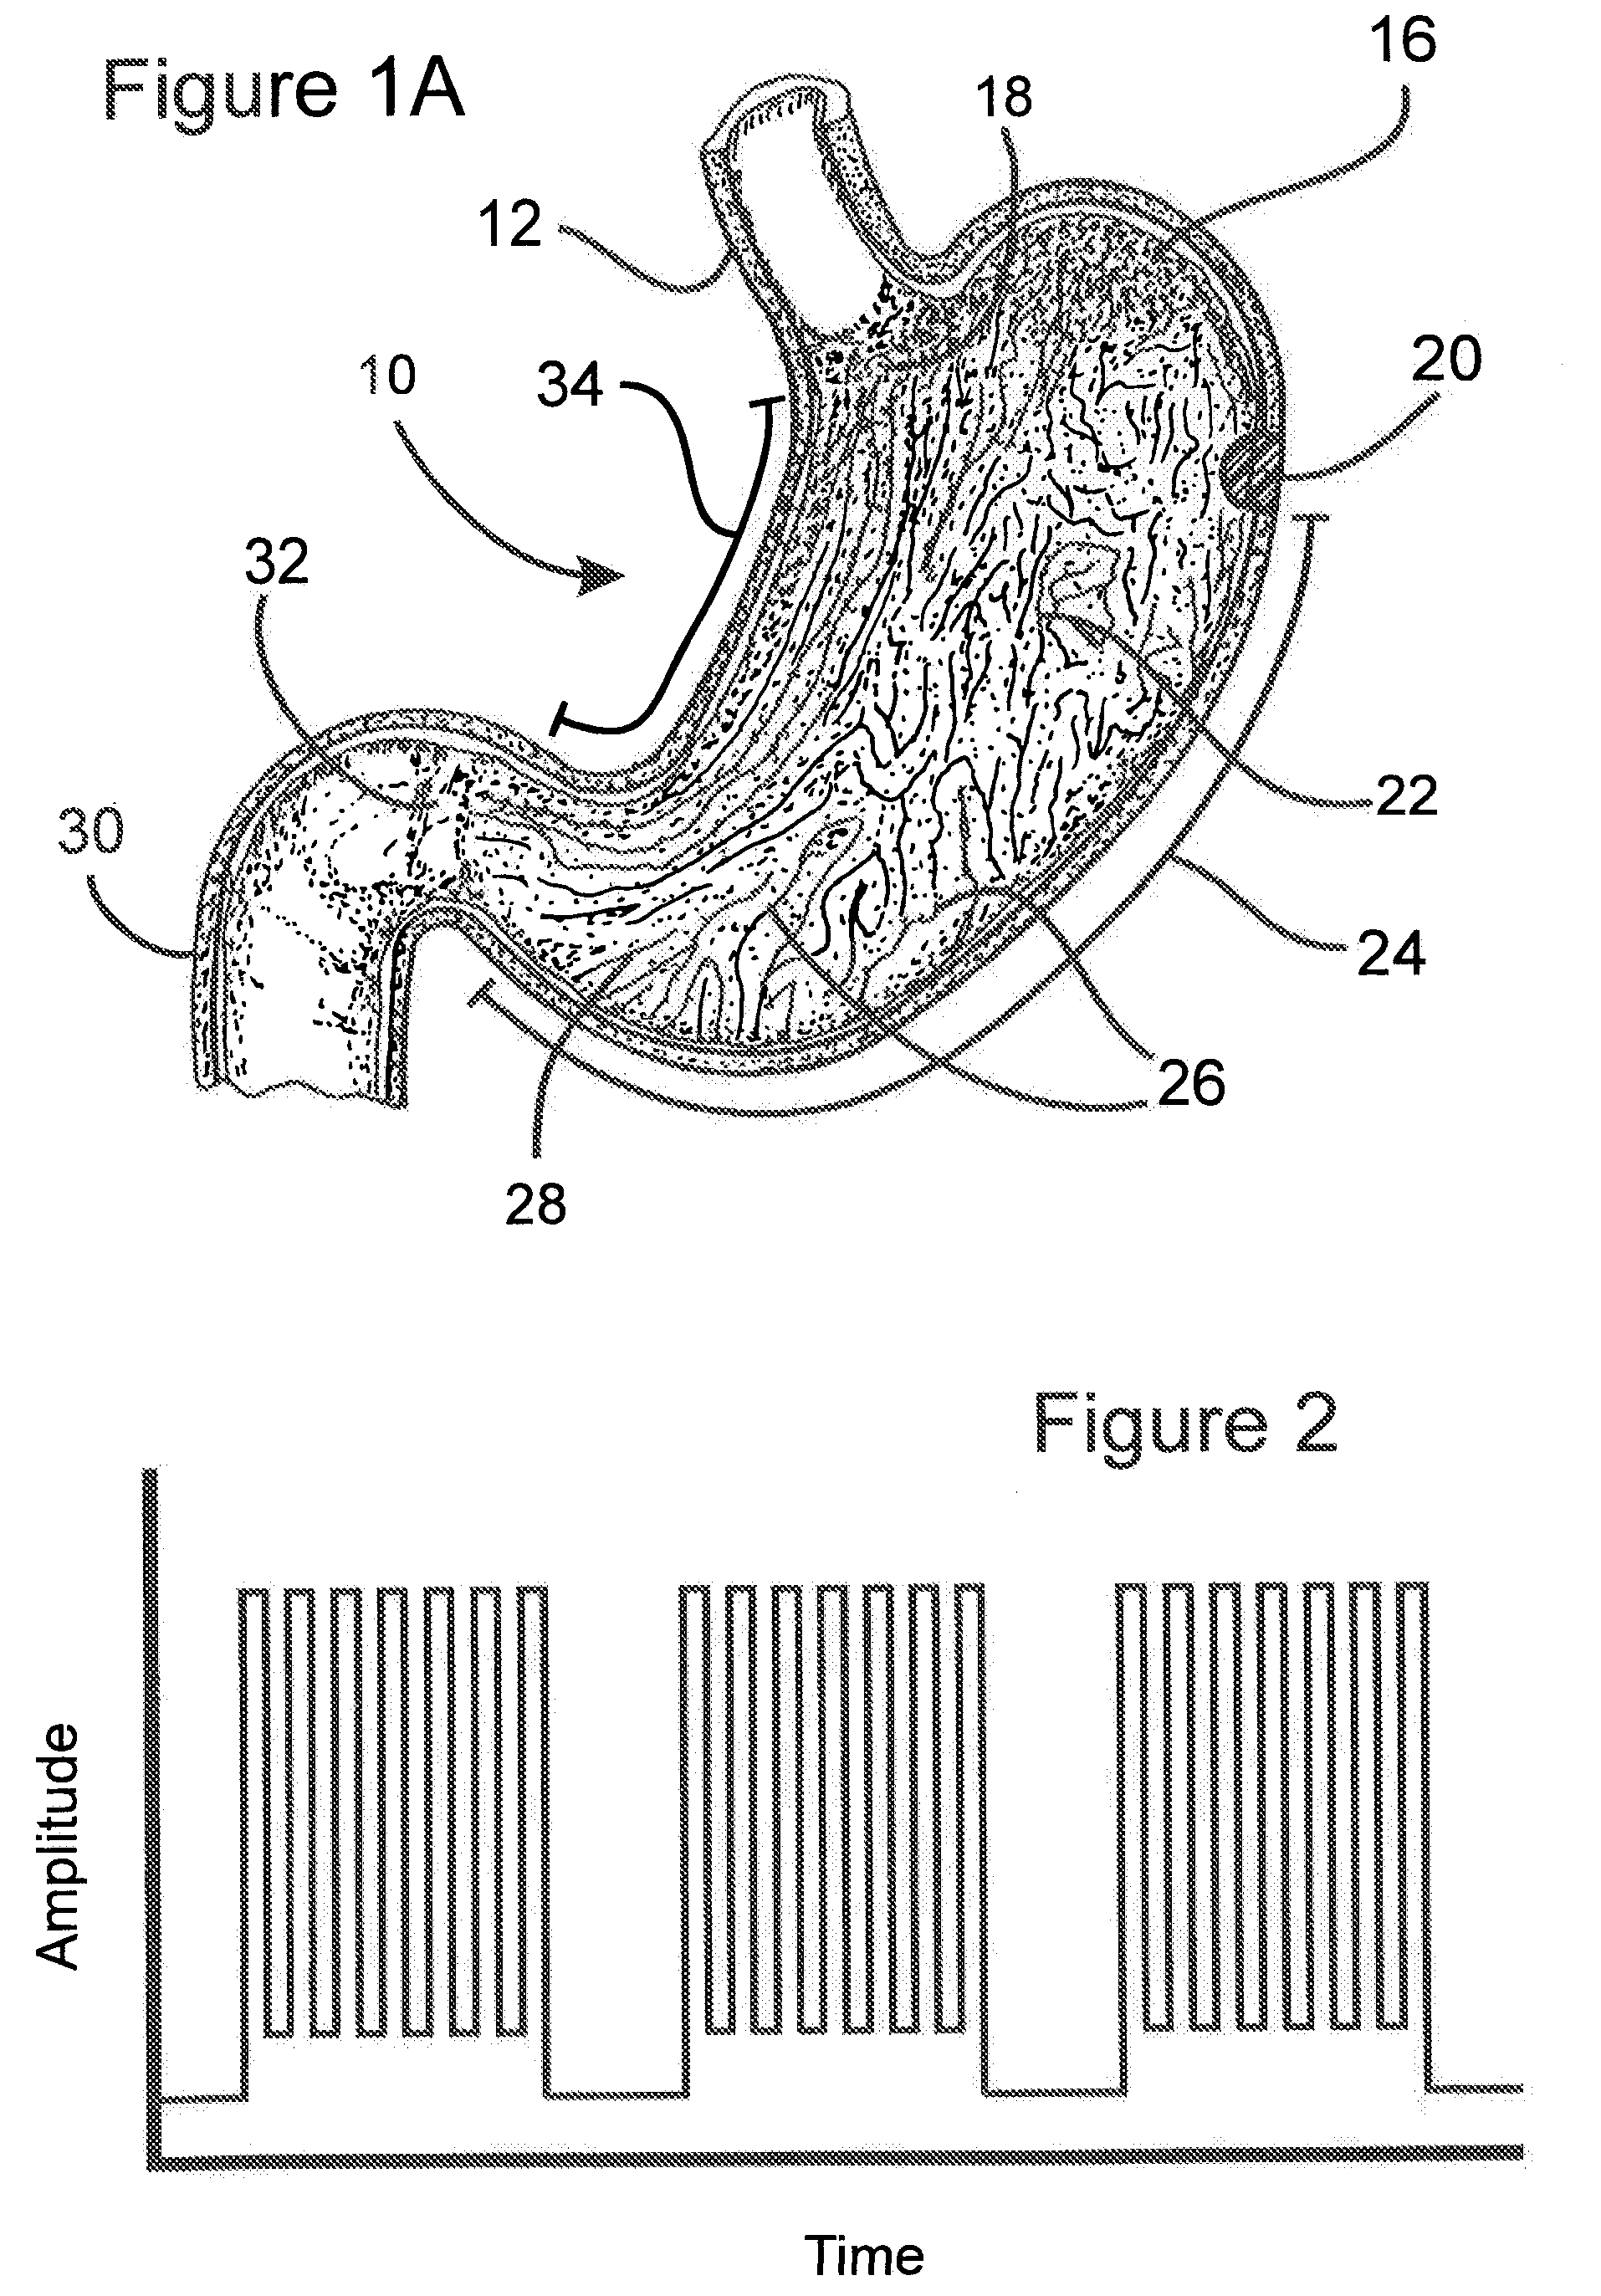 Process for electrostimulation treatment of morbid obesity